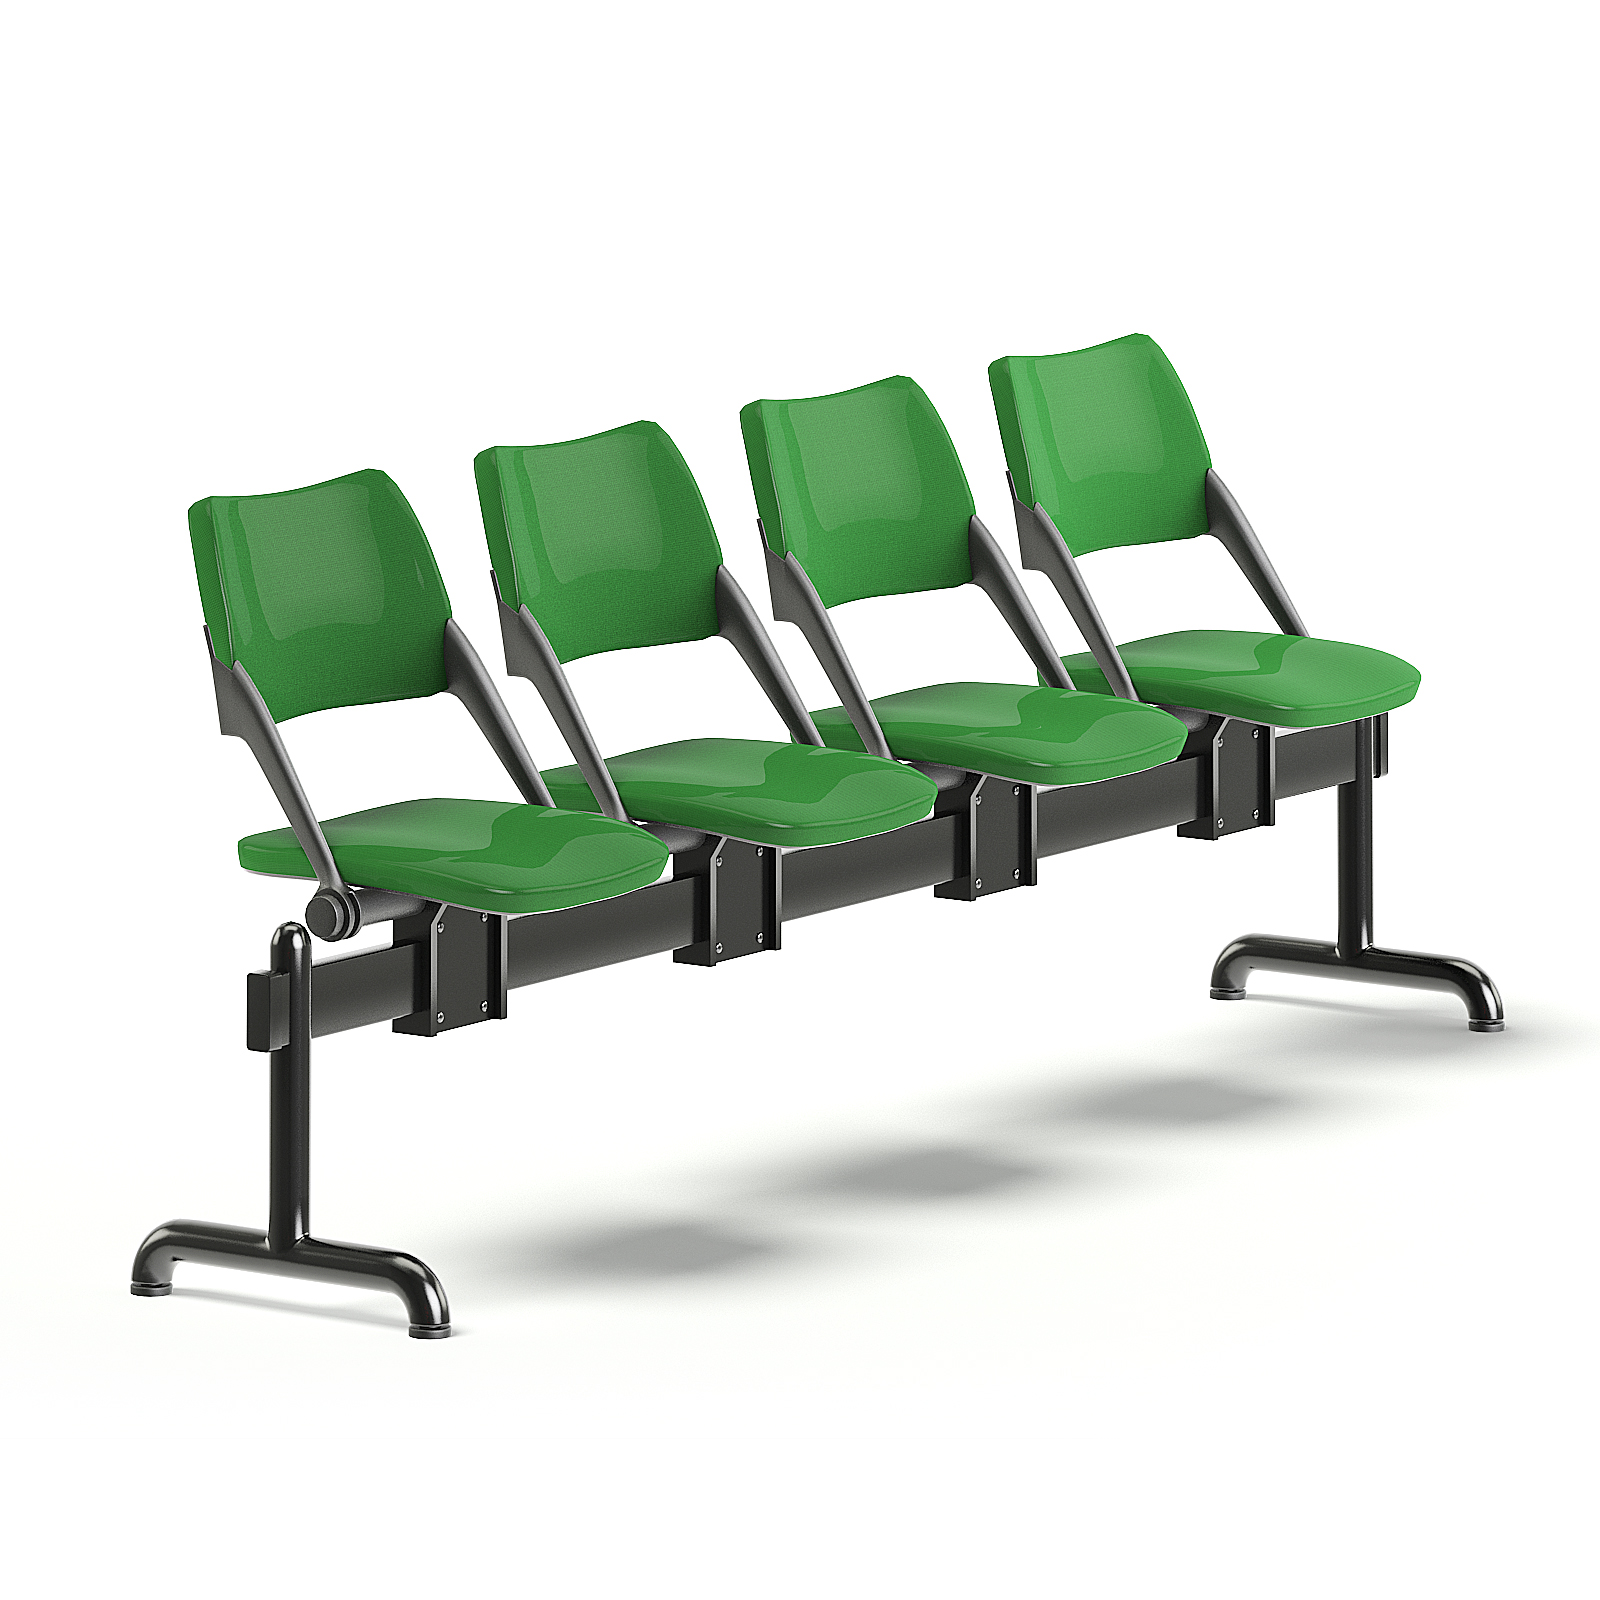 green waiting chairs 3d model